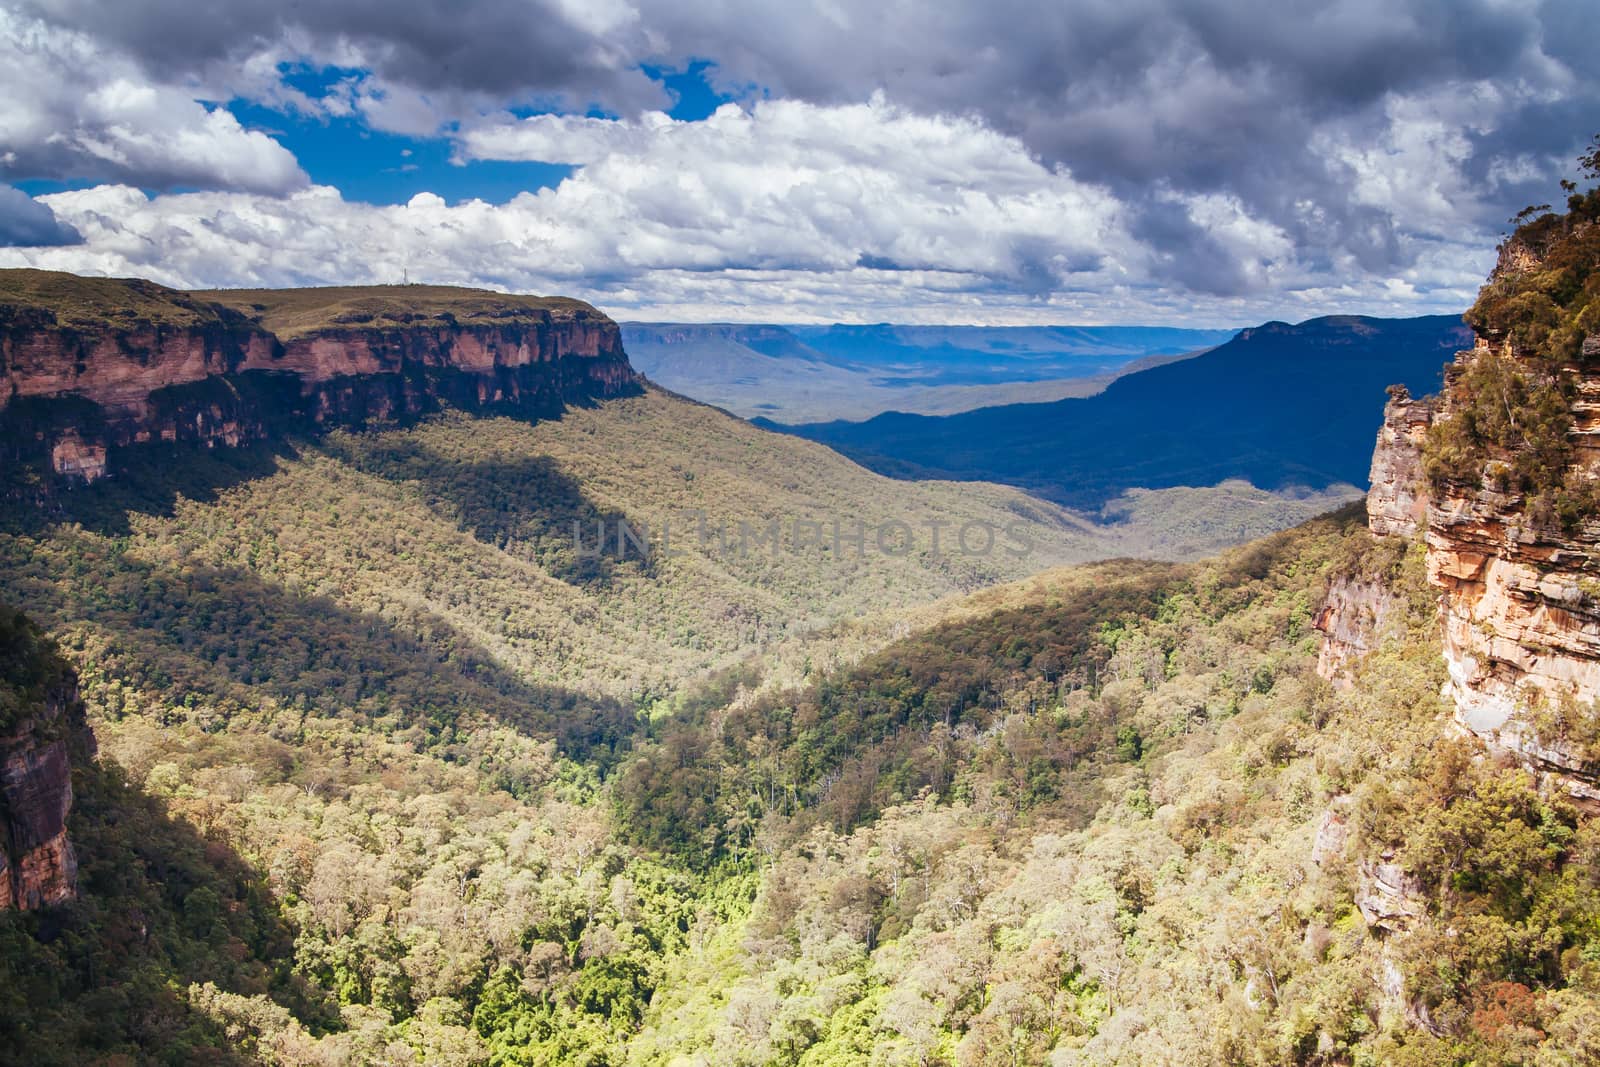 Stunning landscape of the Blue Mountains, New South Wales, Australia